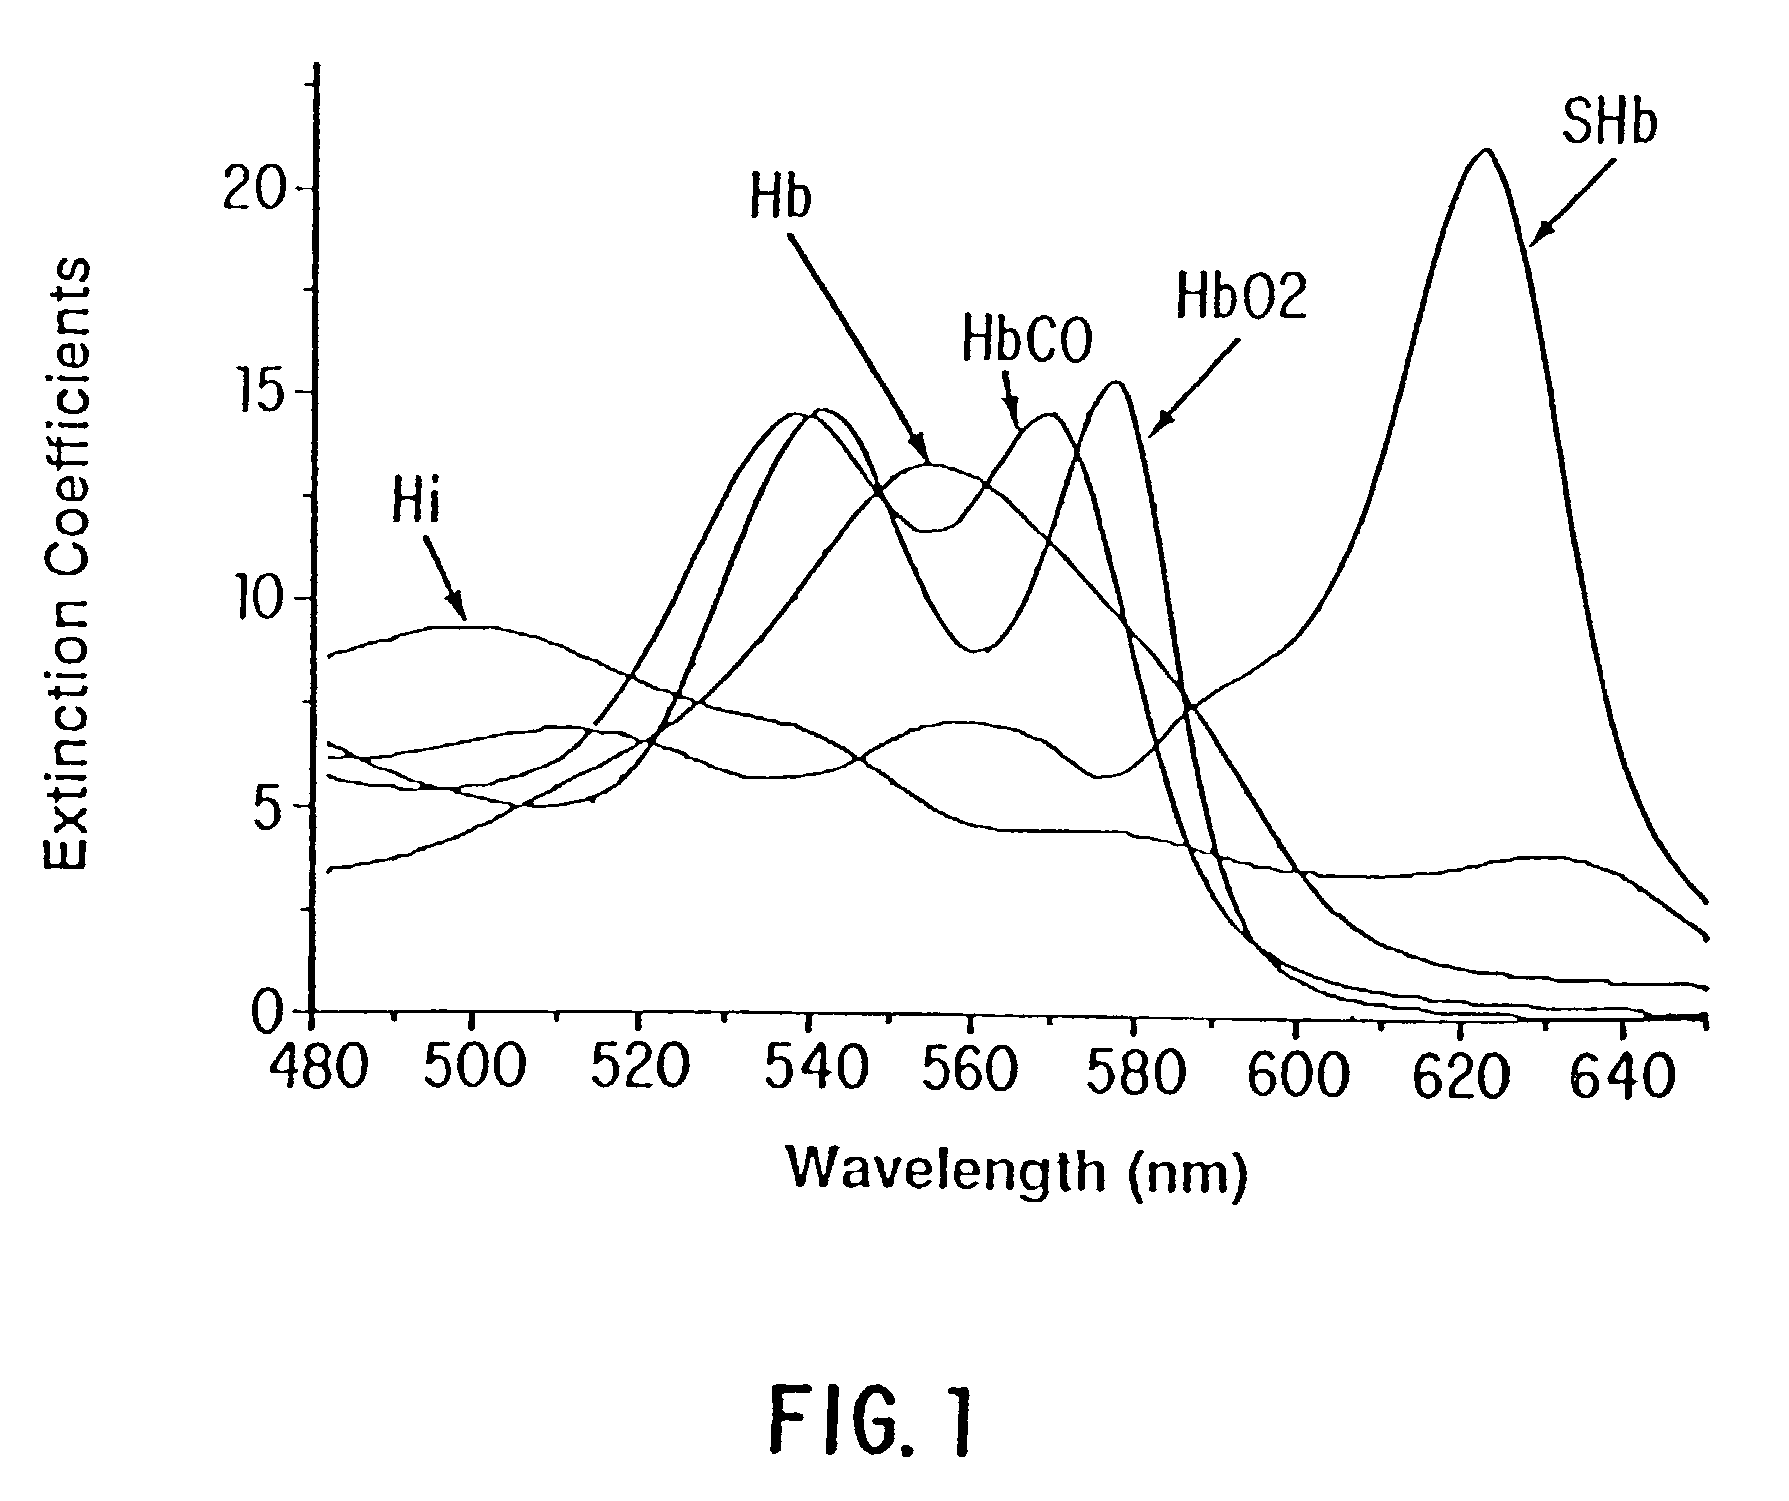 Method and apparatus for direct spectrophotometric measurements in unaltered whole blood